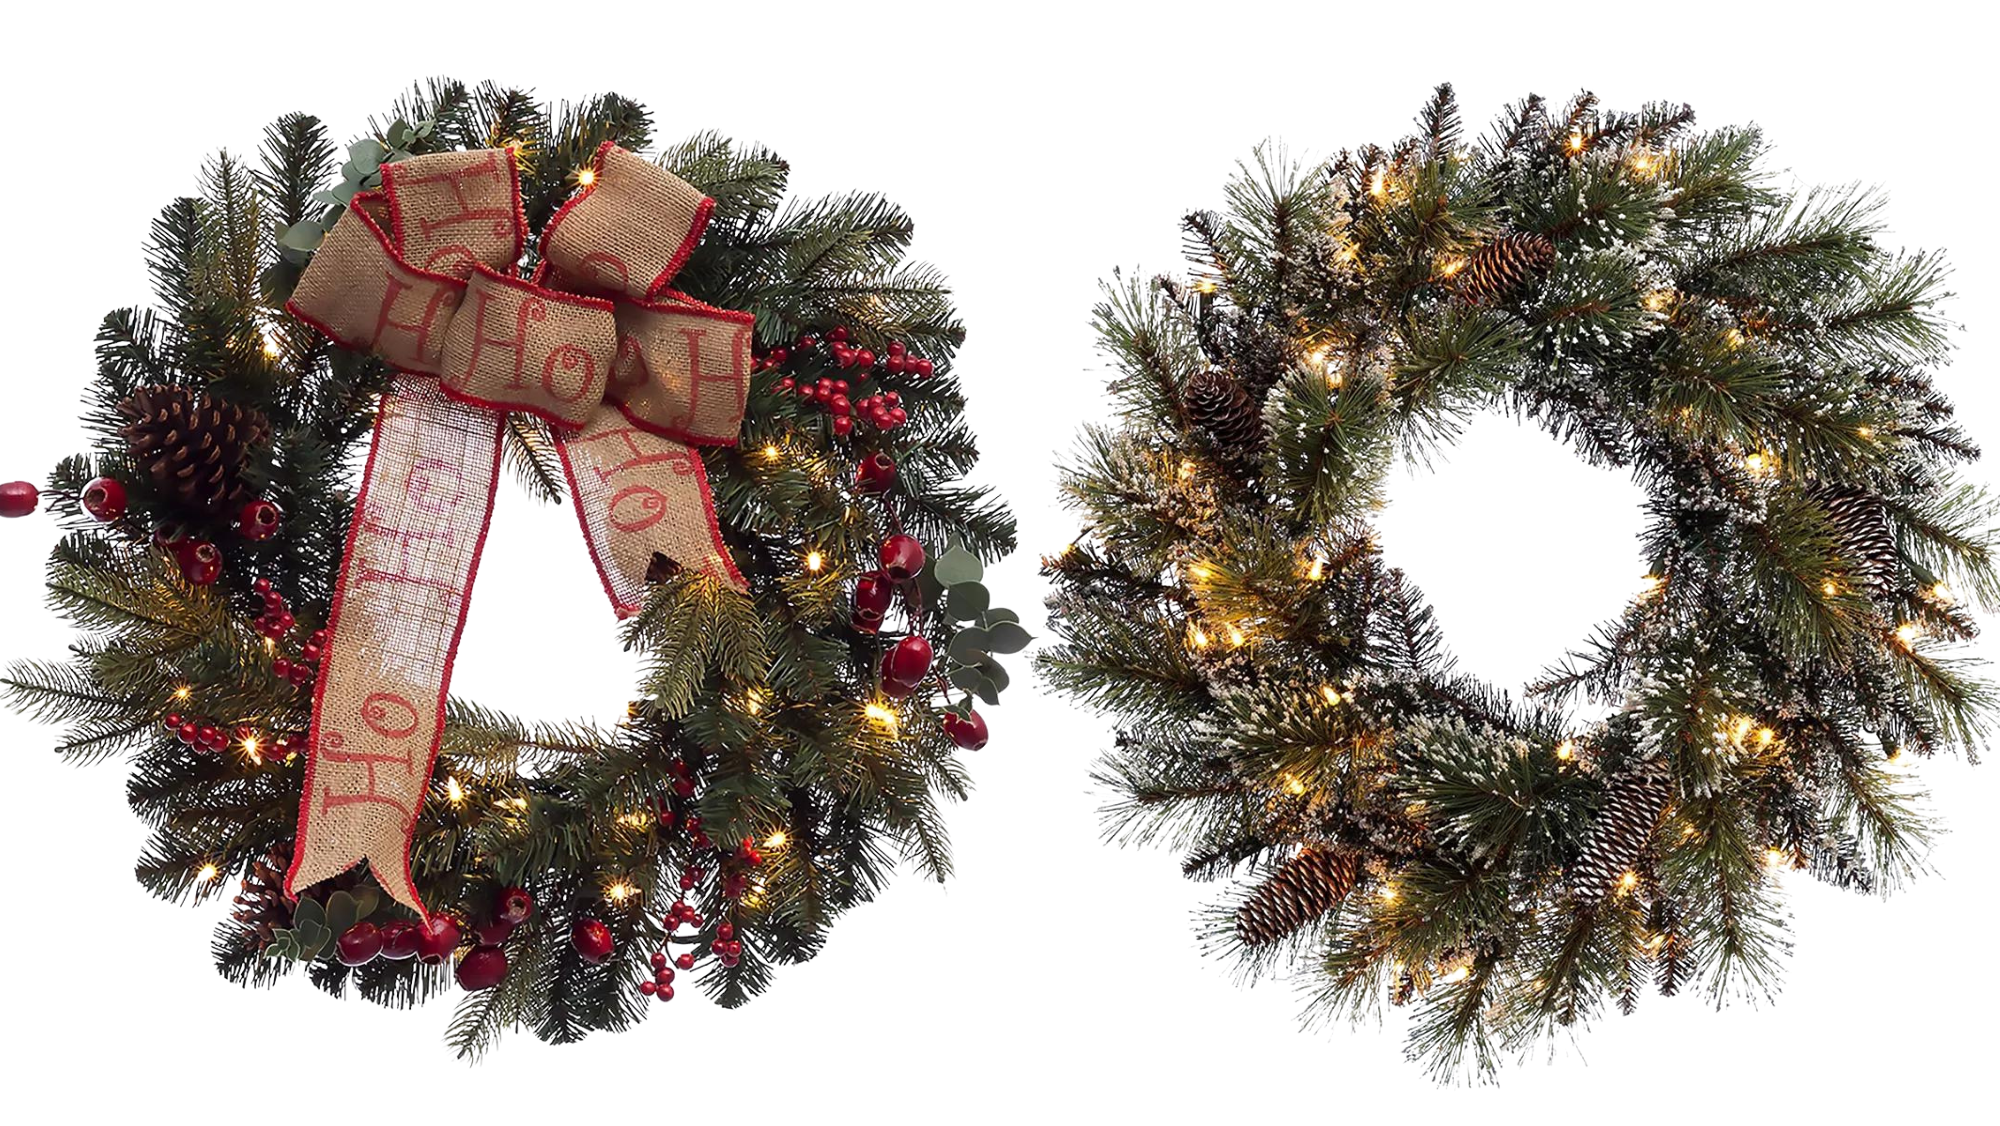 two wreaths side by side on white background